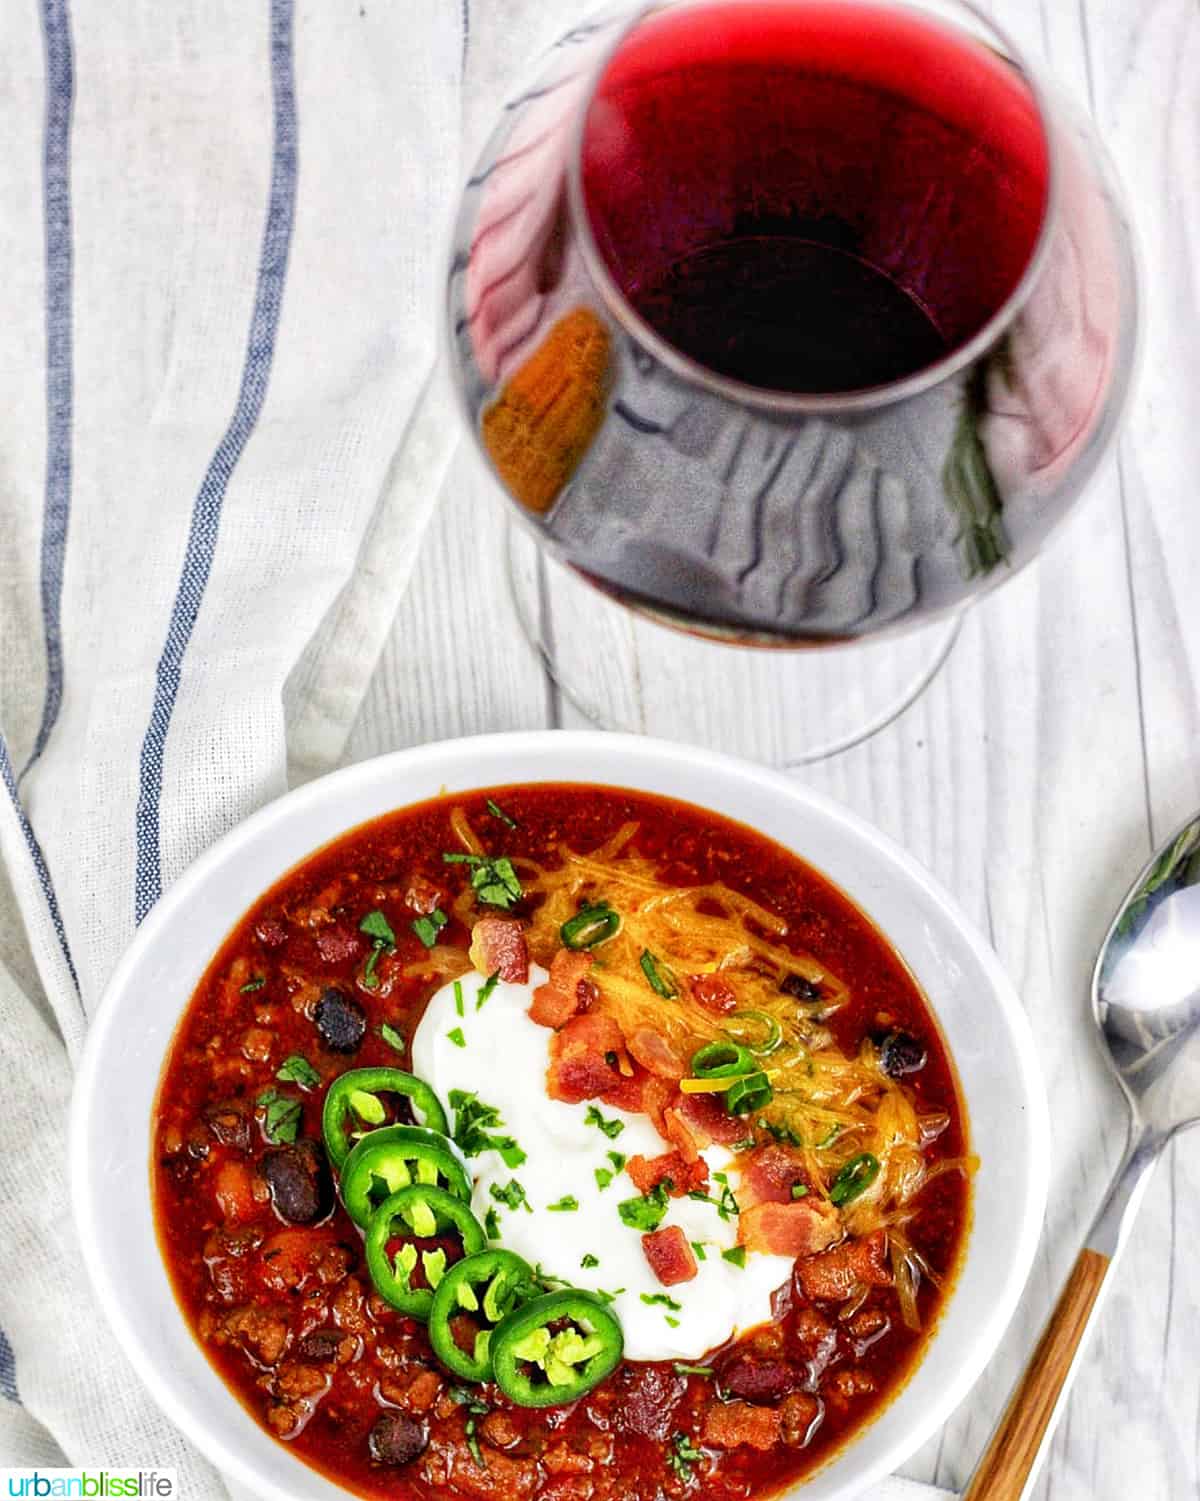 bowl of chili topped with jalapenos, sour cream, bacon, and cheese, with a glass of red wine on white table with spoon.